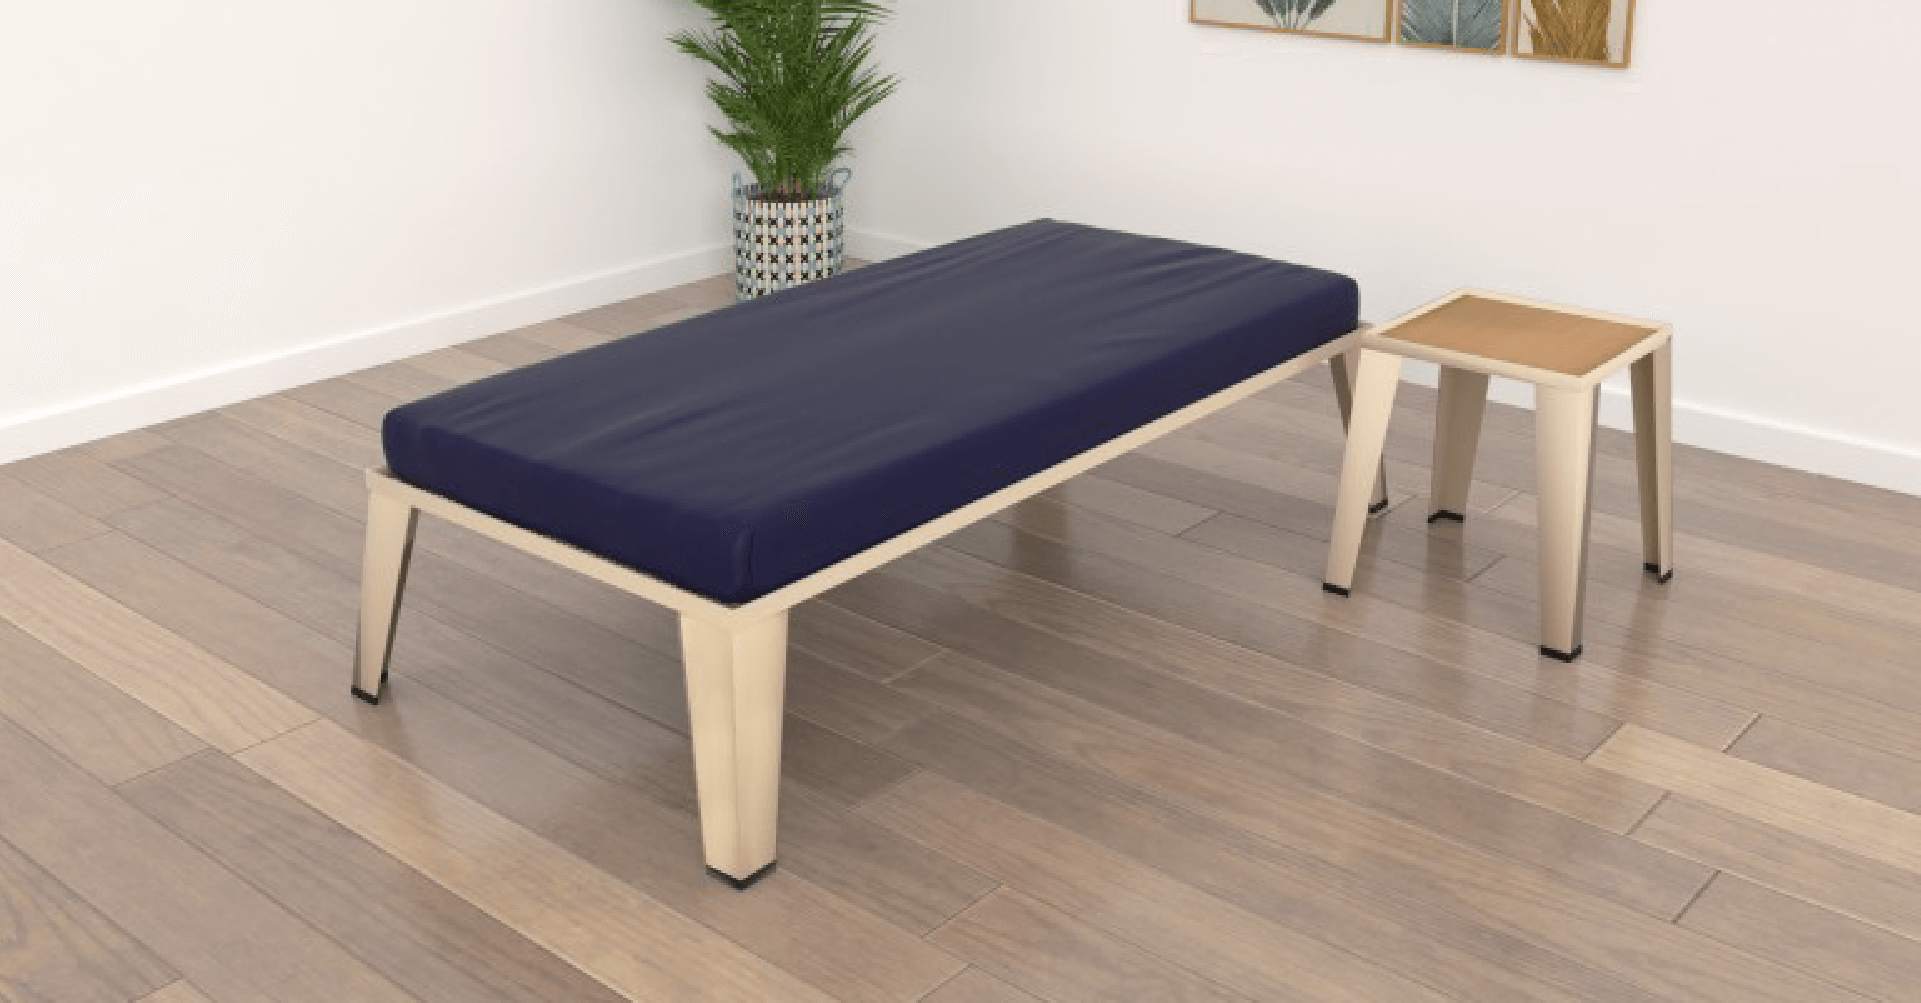 Central city beds product mattress